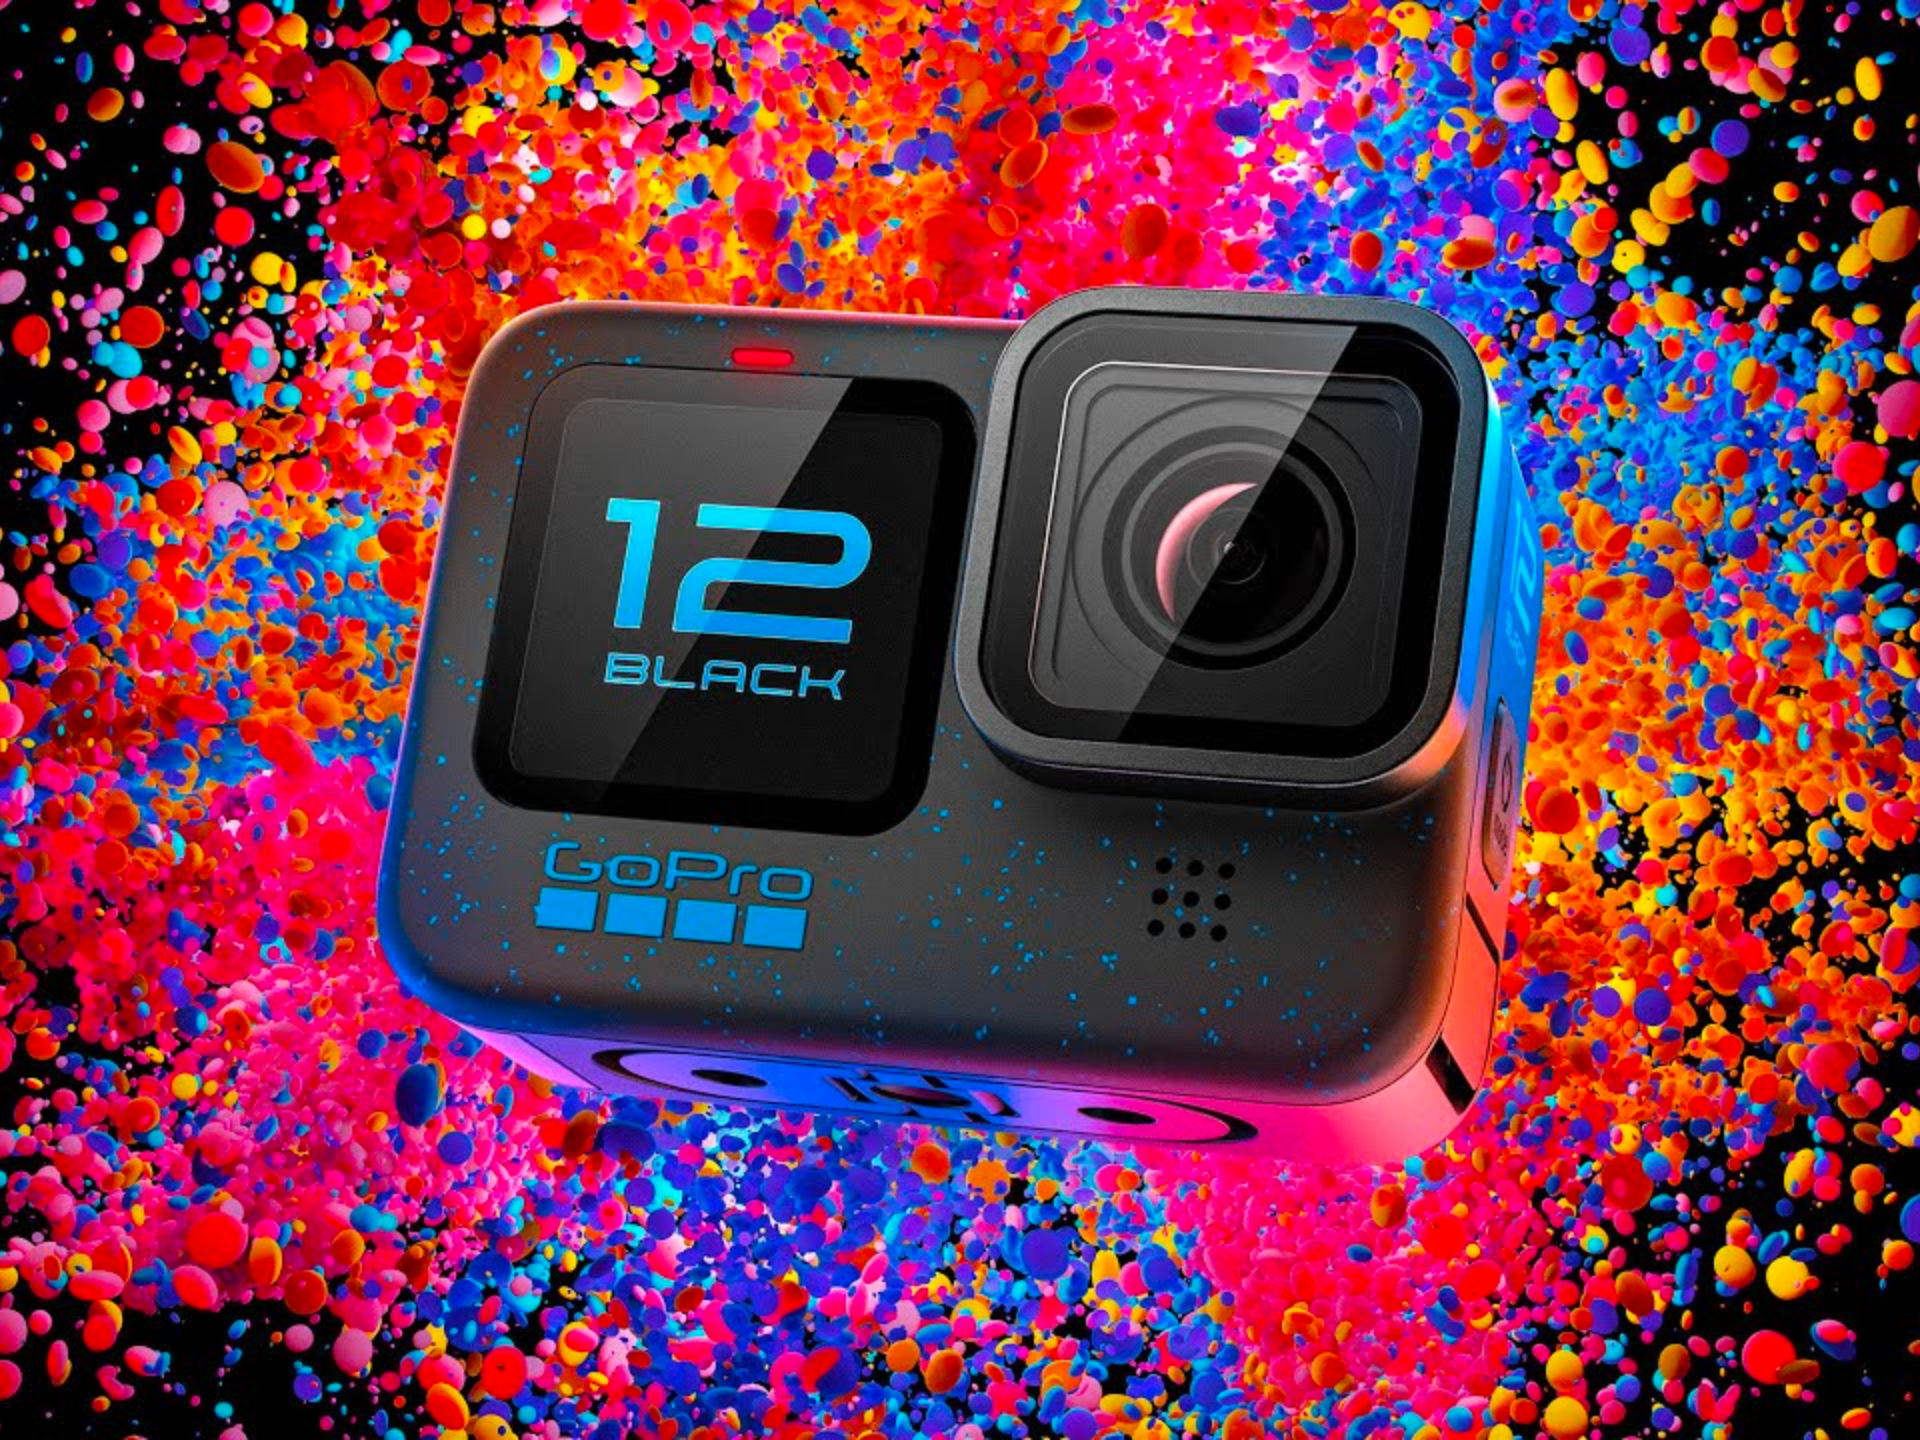 GoPro HERO12 Black Action Camera Specifications Reveal A 27MP